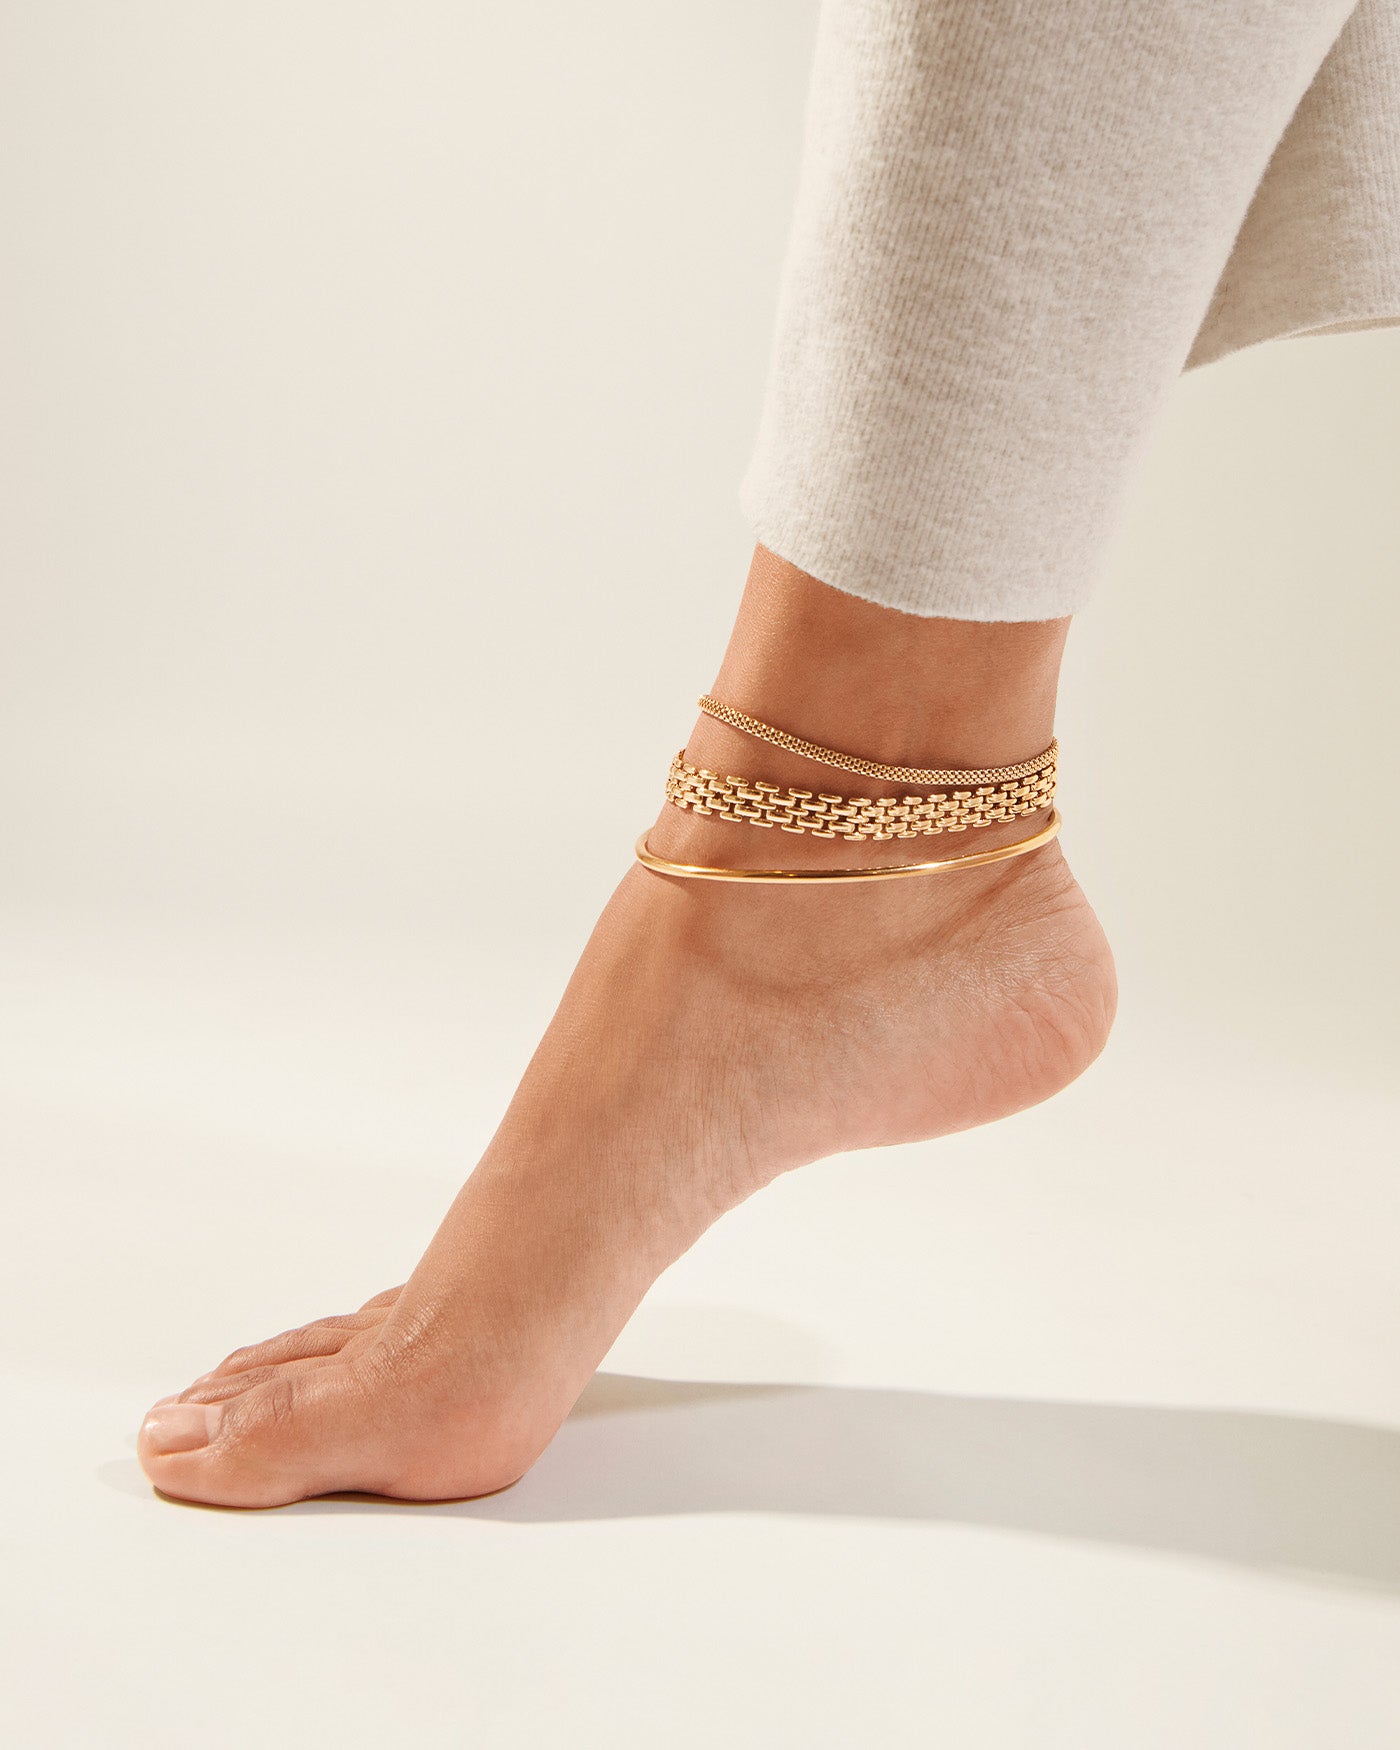 The Textured Anklet Stack